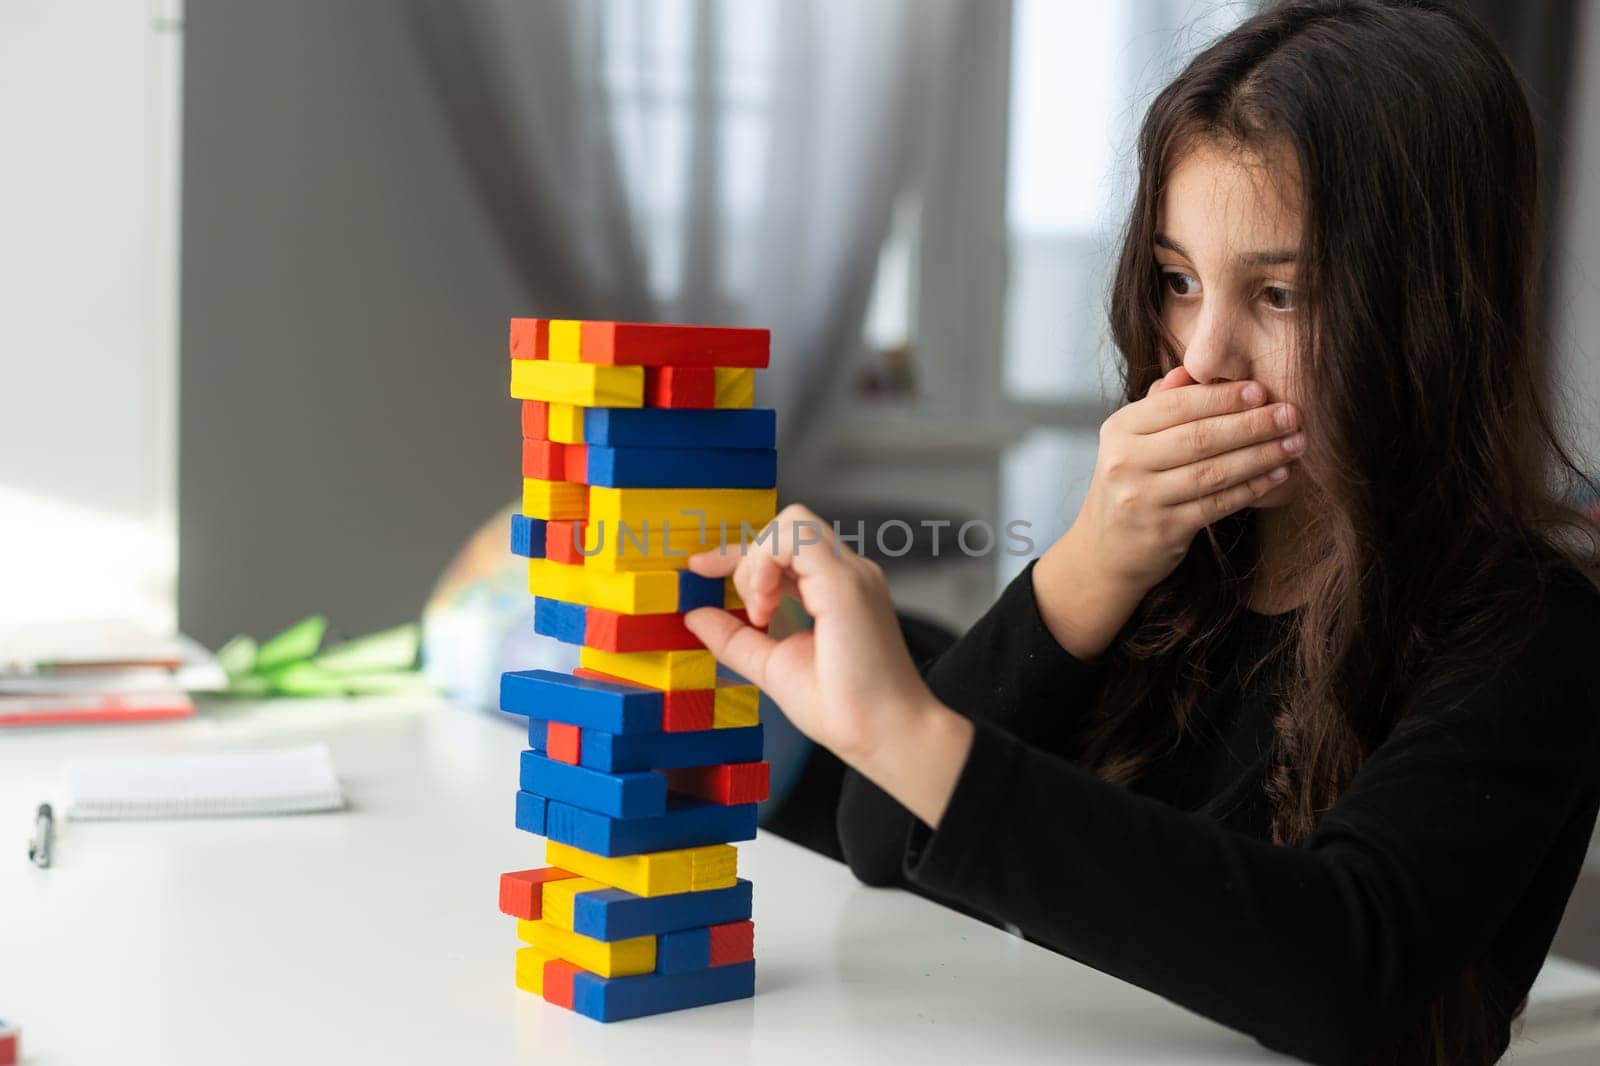 a little girl play a board game jenga at the table. Construction of a tower from wooden cubes